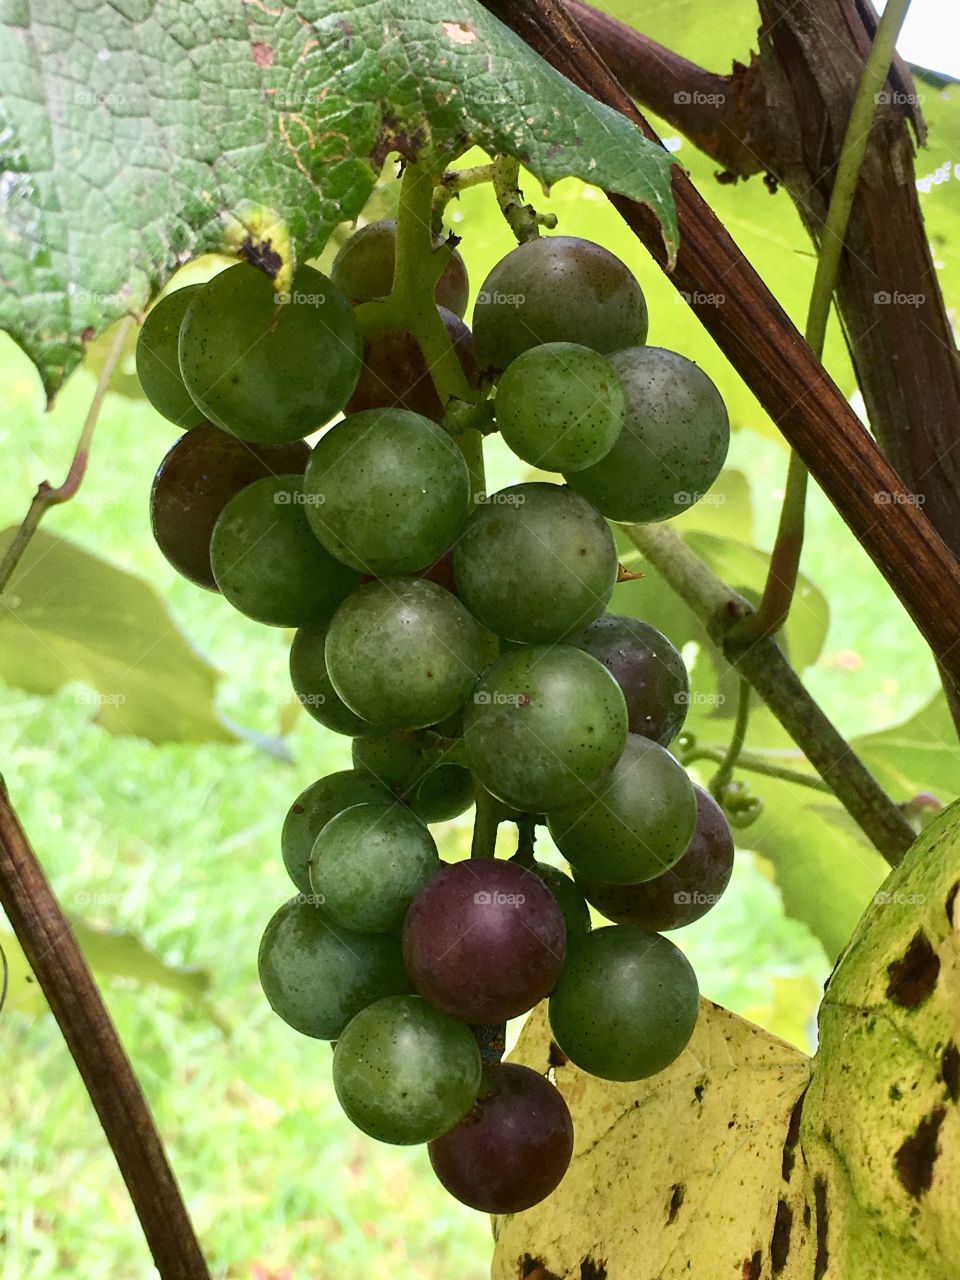 A small pod of Concord grapes are hiding as they soak up the summer sun to build their sugar content as they ripen to be transformed into wine or preserves.